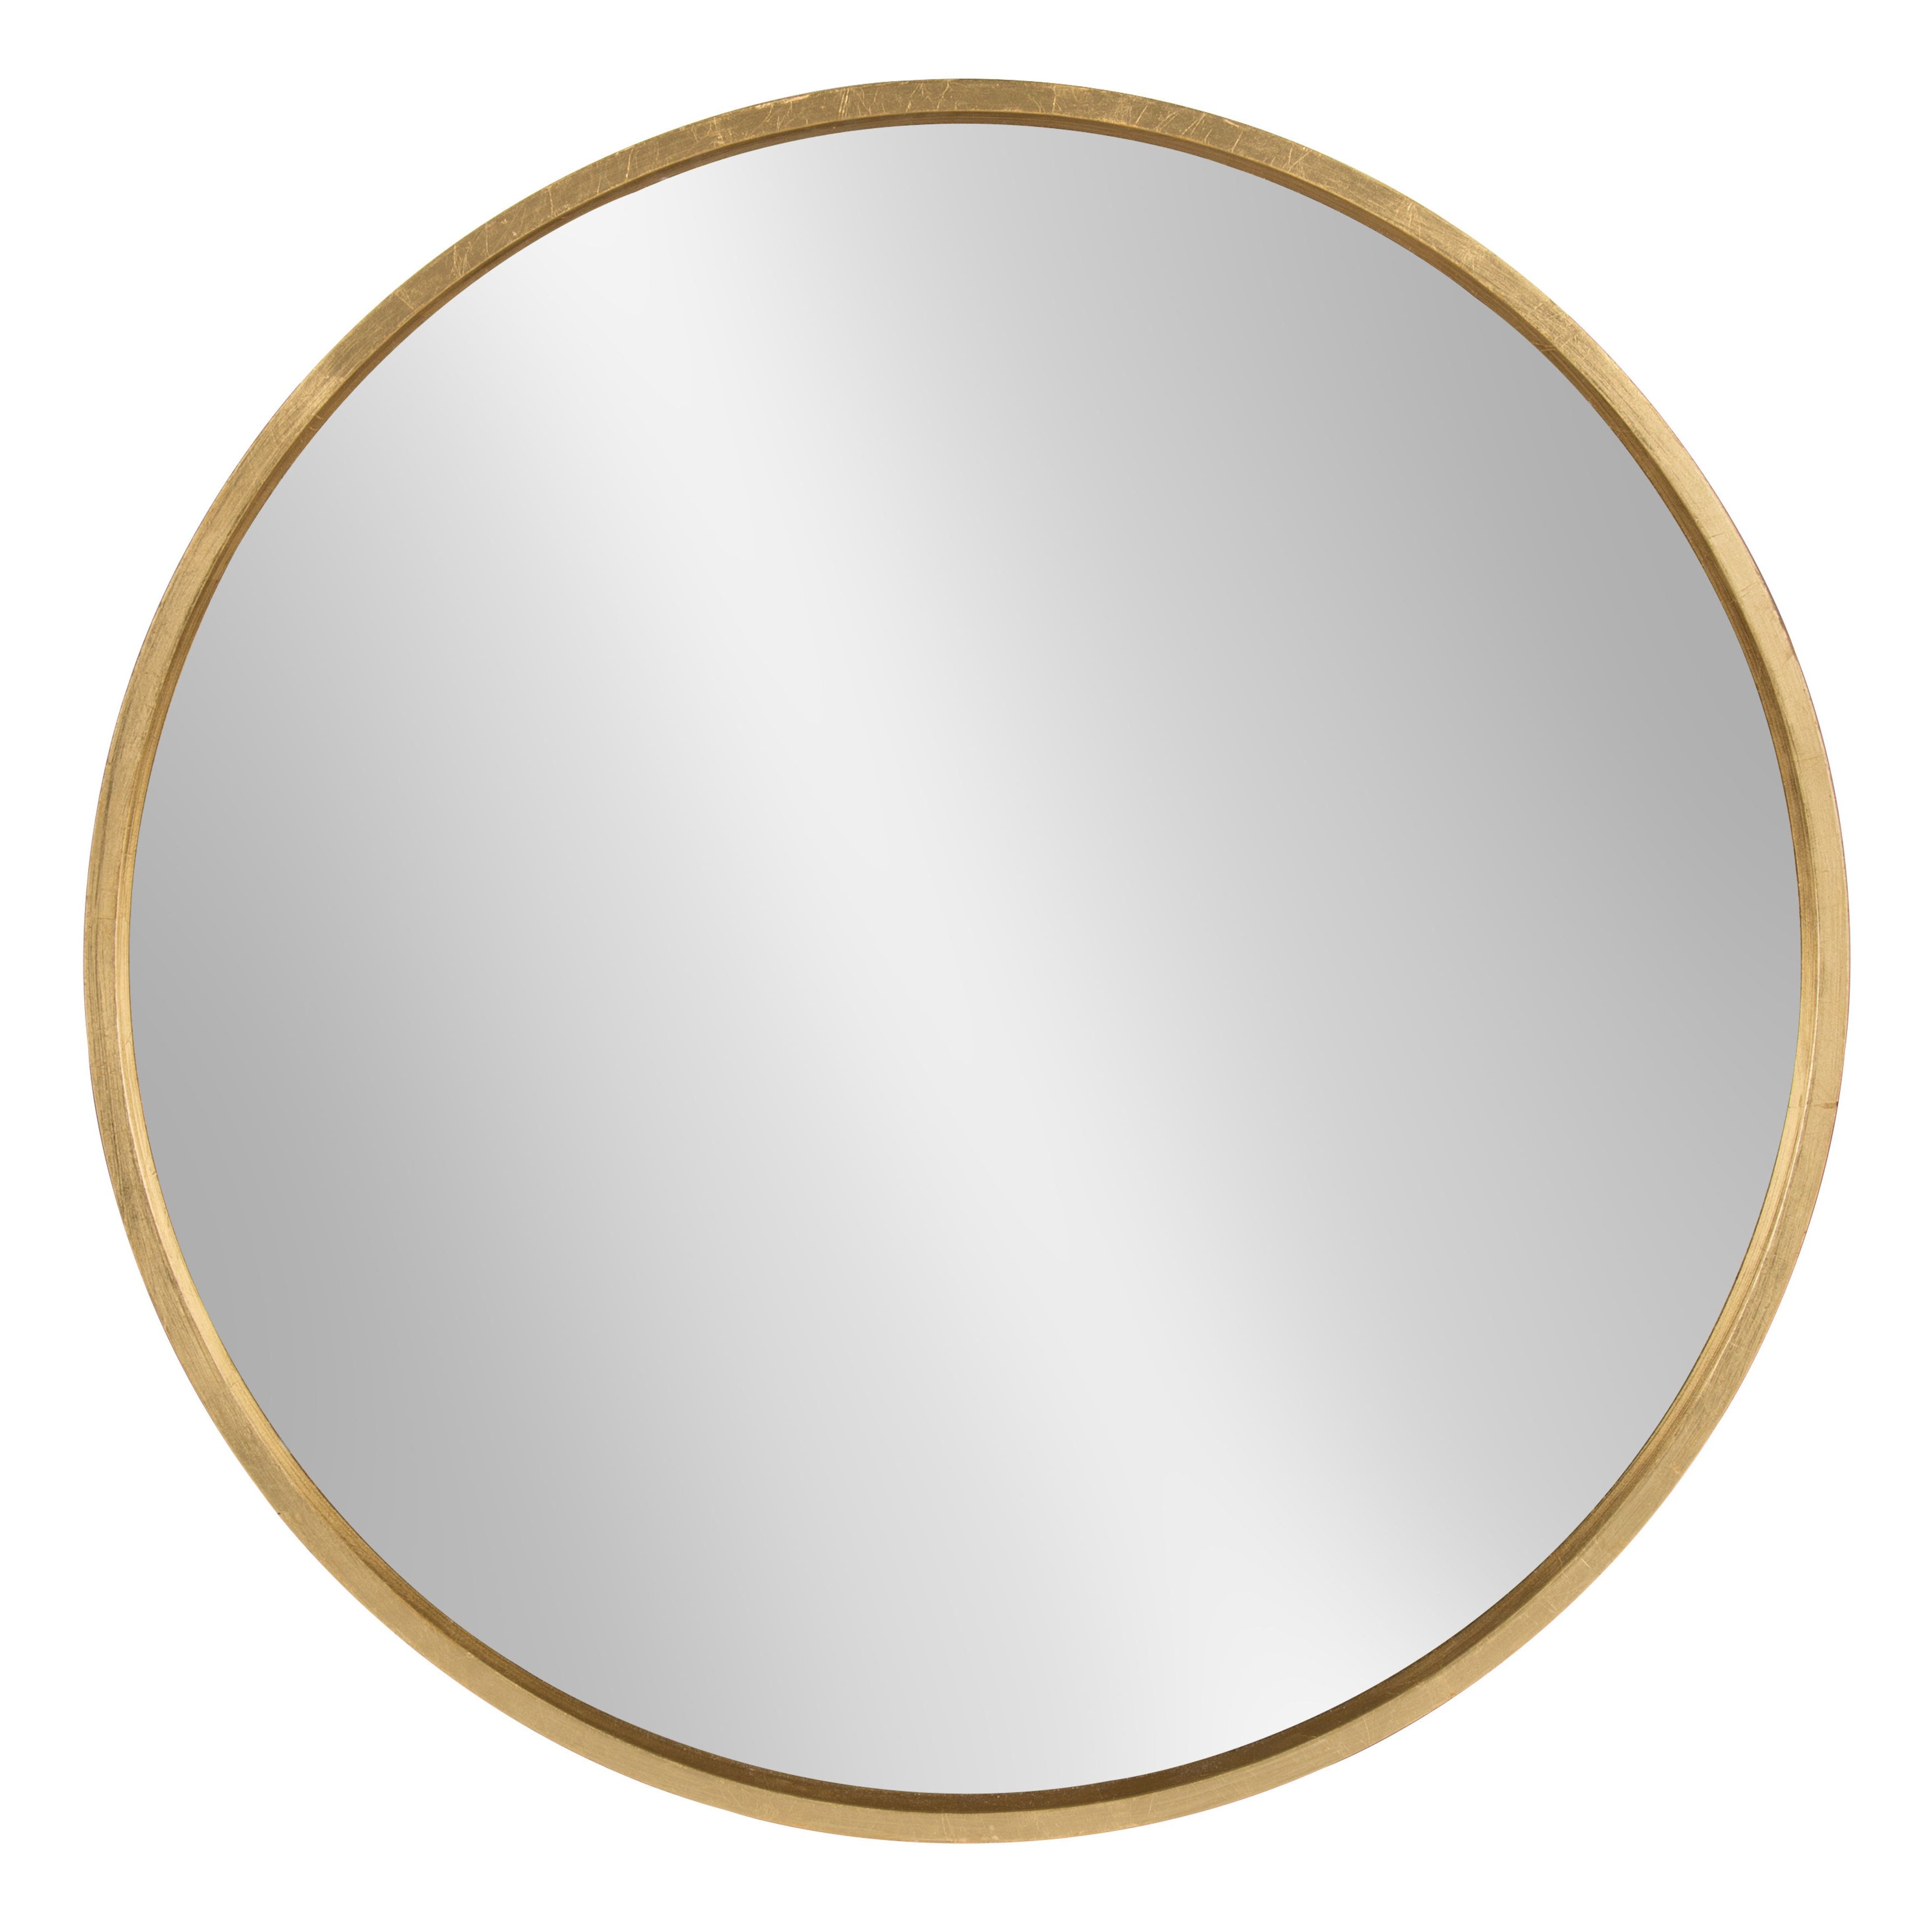 Loftis Modern & Contemporary Accent Wall Mirrors Regarding Most Popular Tanner Accent Mirror (View 17 of 20)